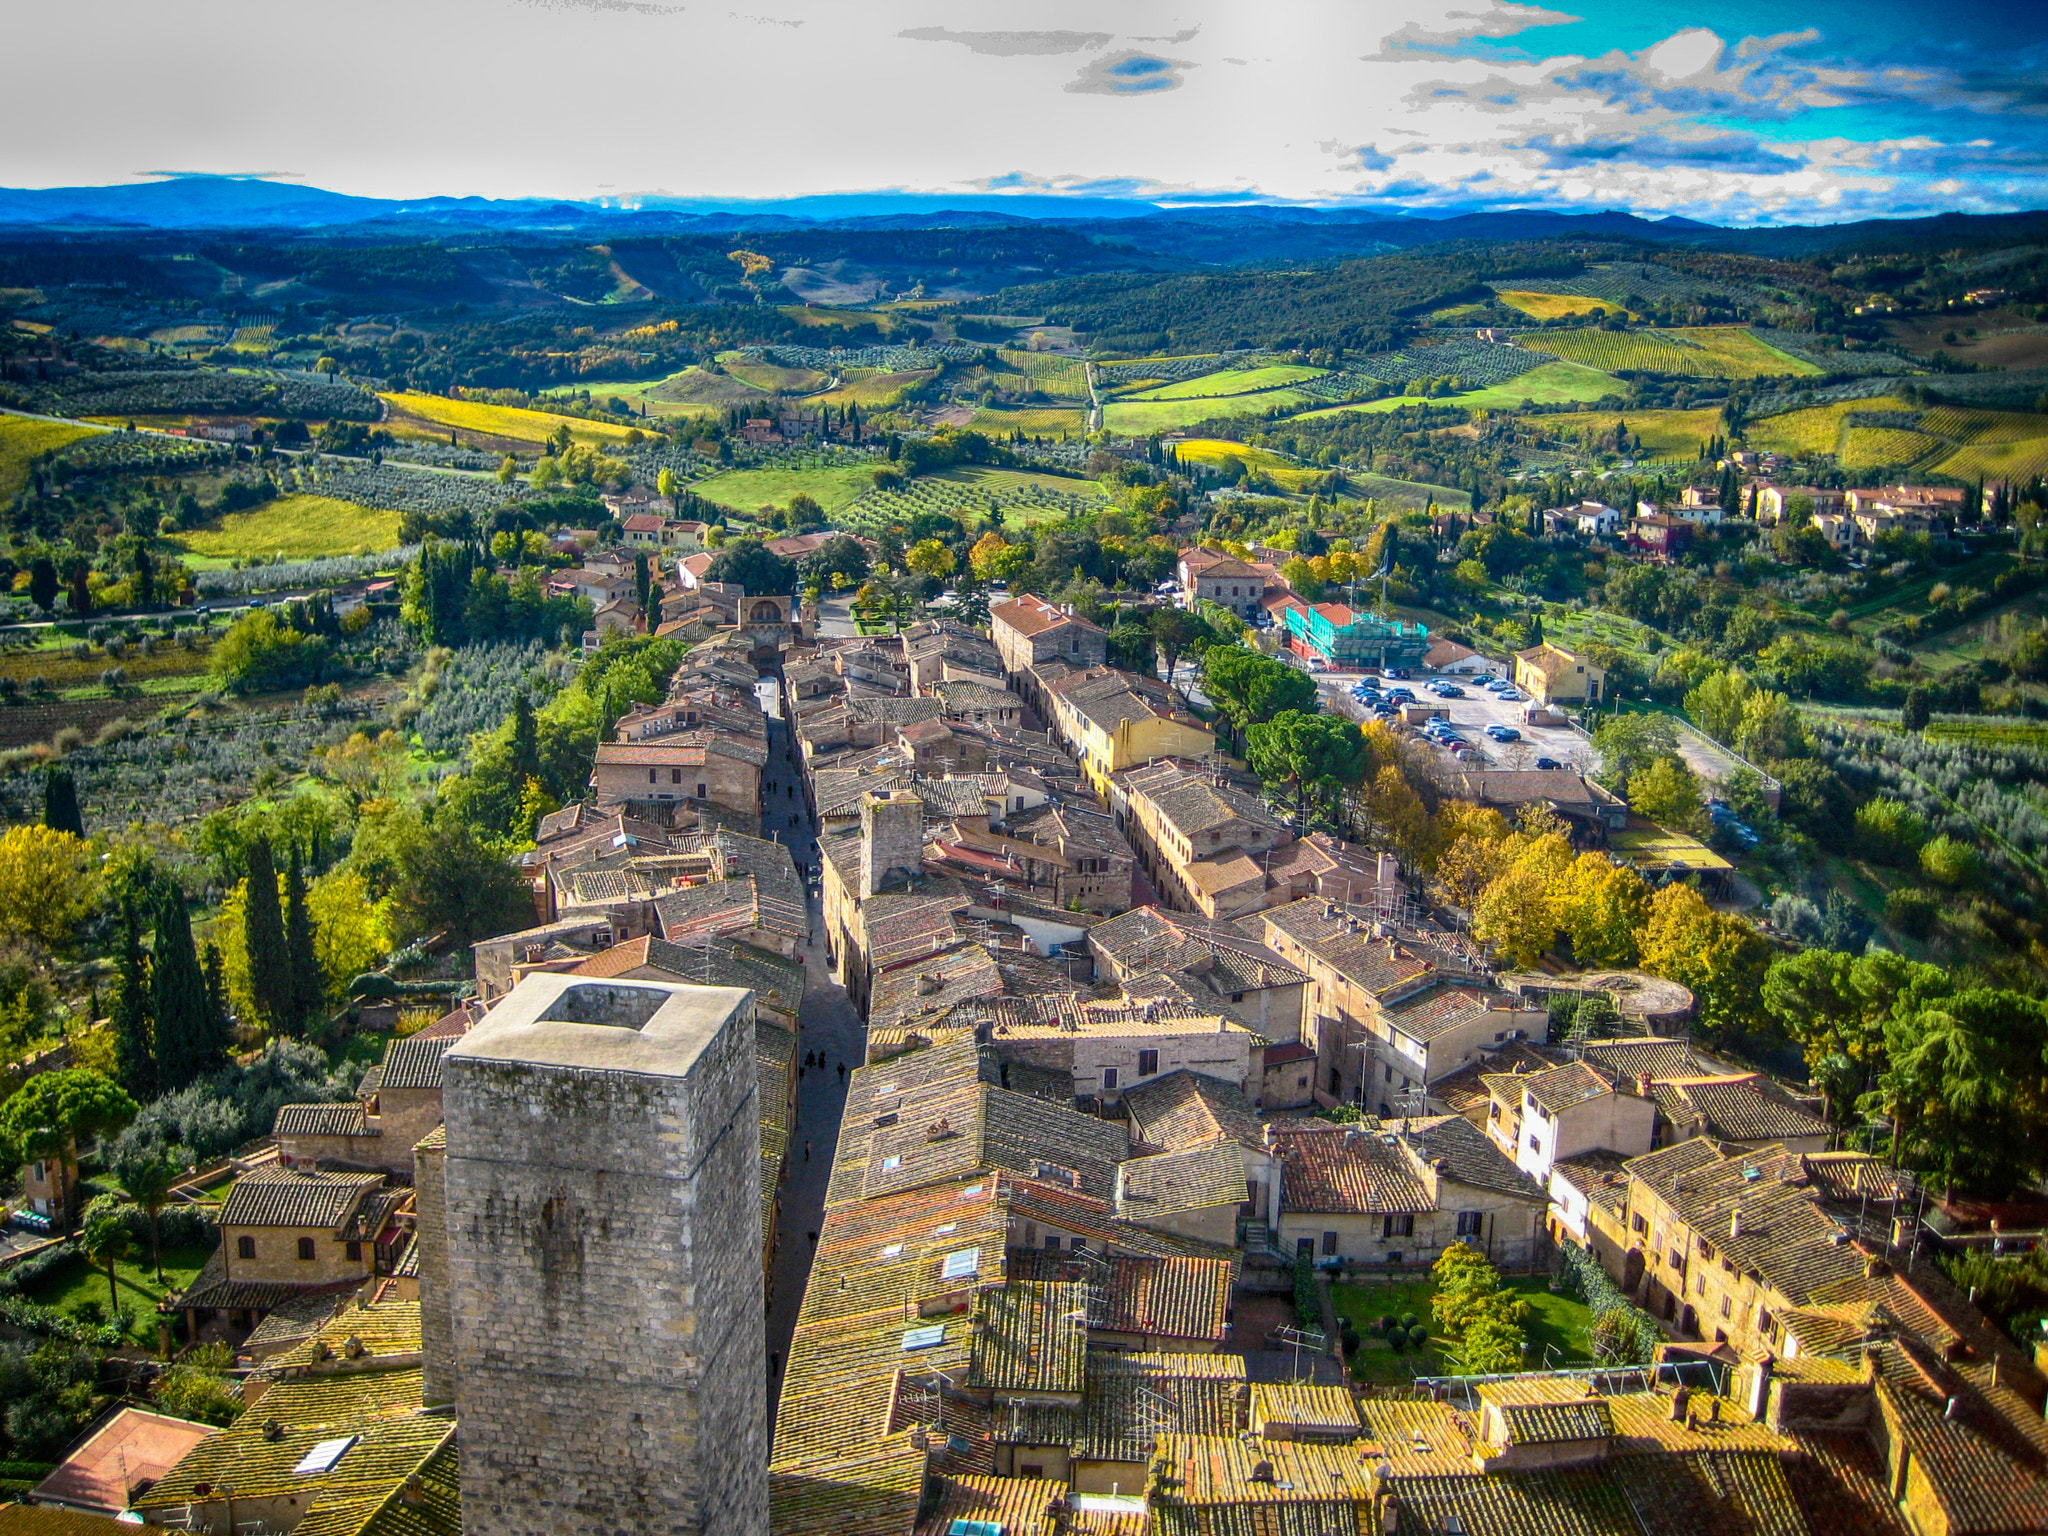 Canon DIGITAL IXUS 75 sample photo. San gimignano: view from a tower photography